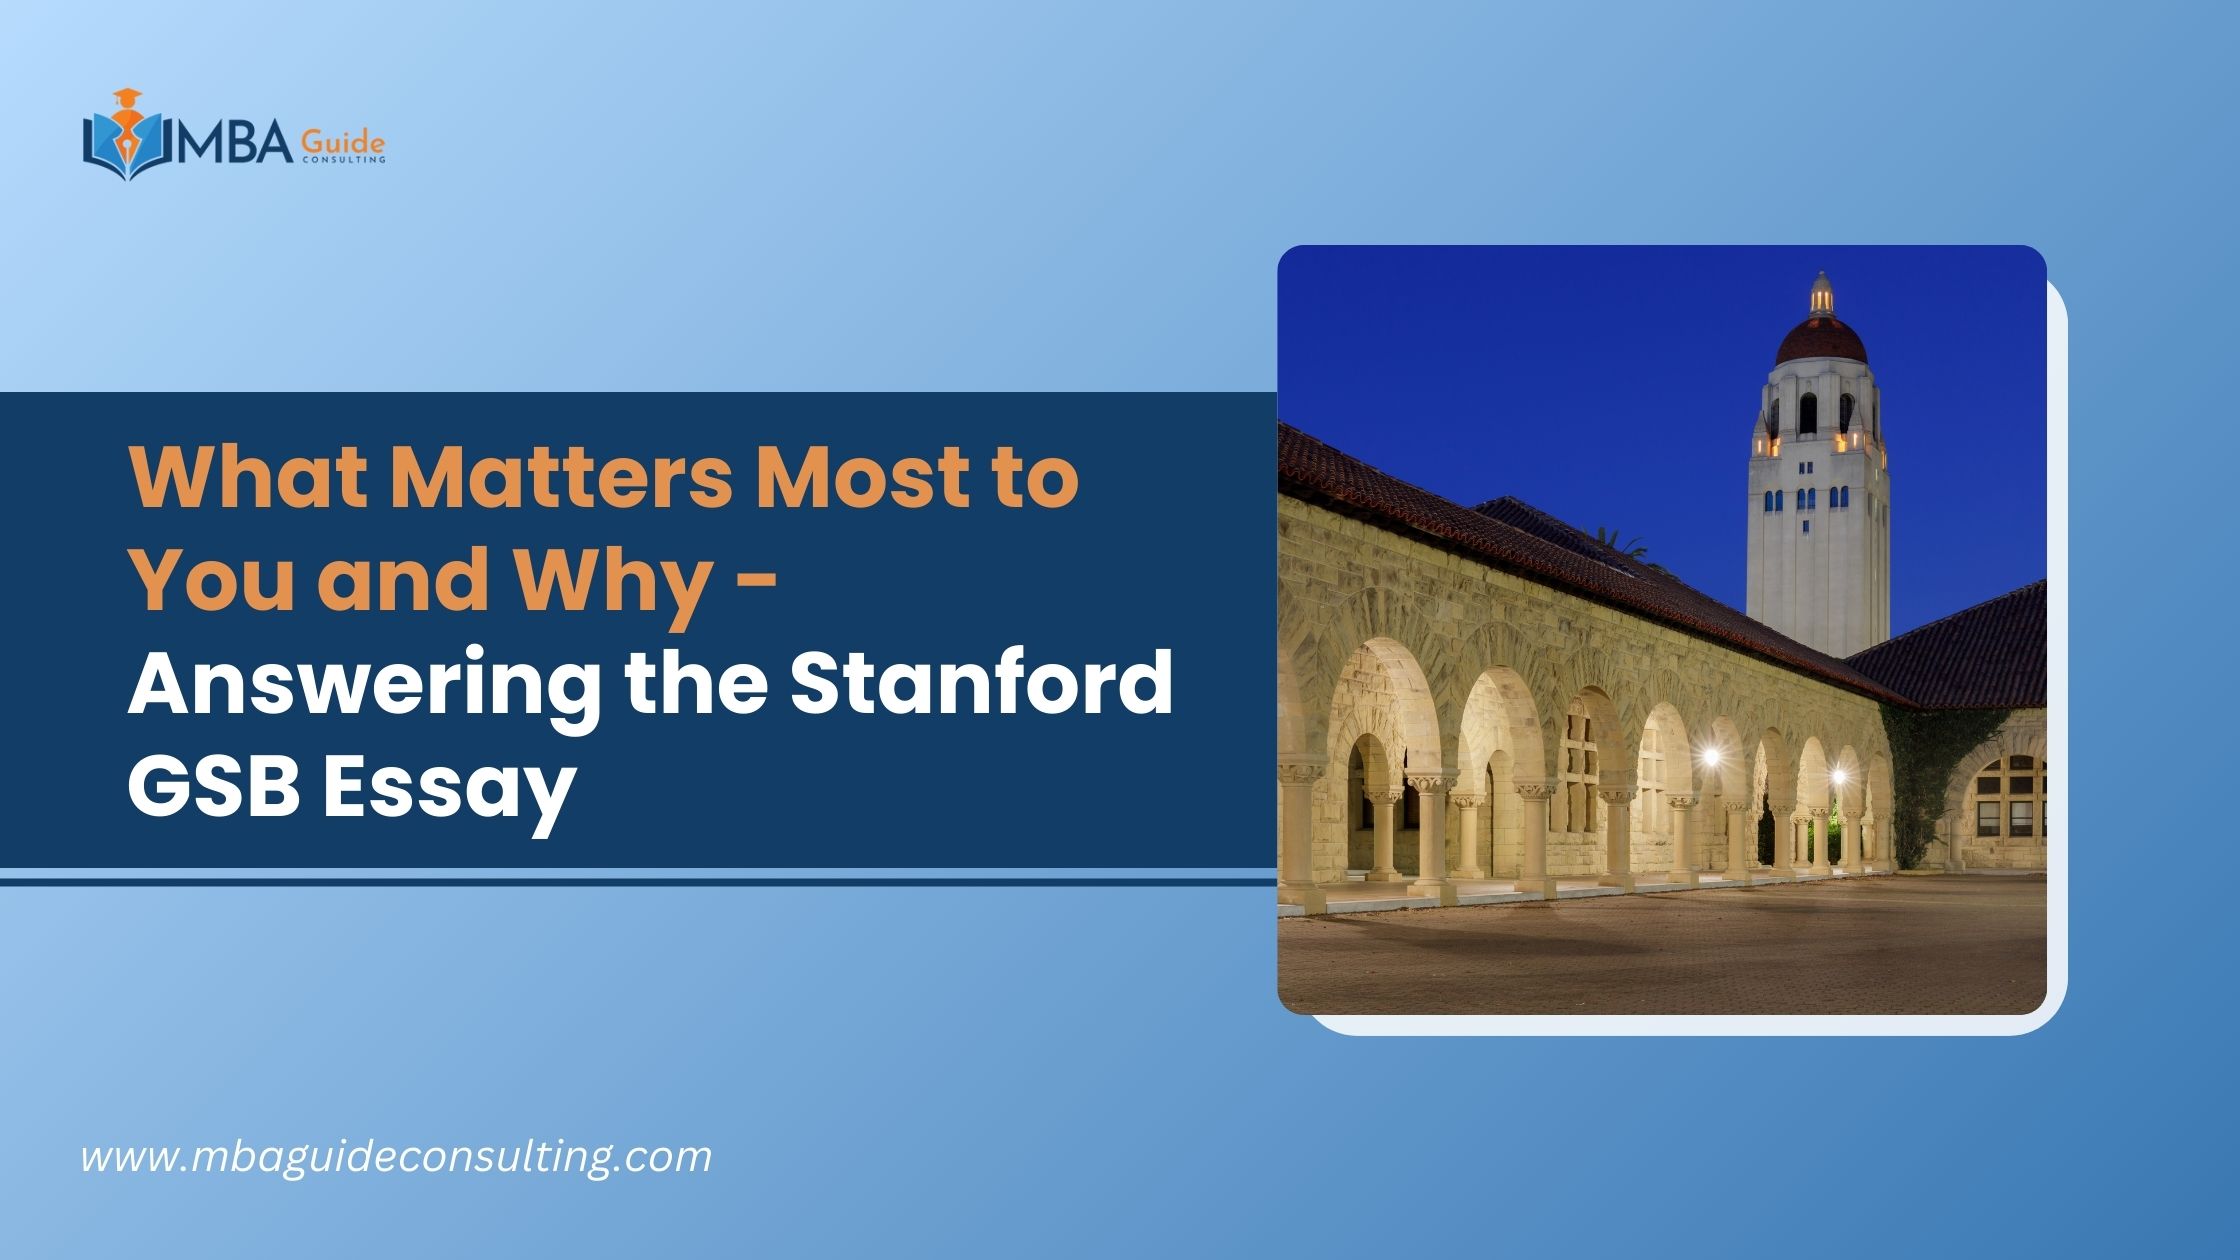 What Matters Most to You and Why- Answering the Stanford GSB Essay